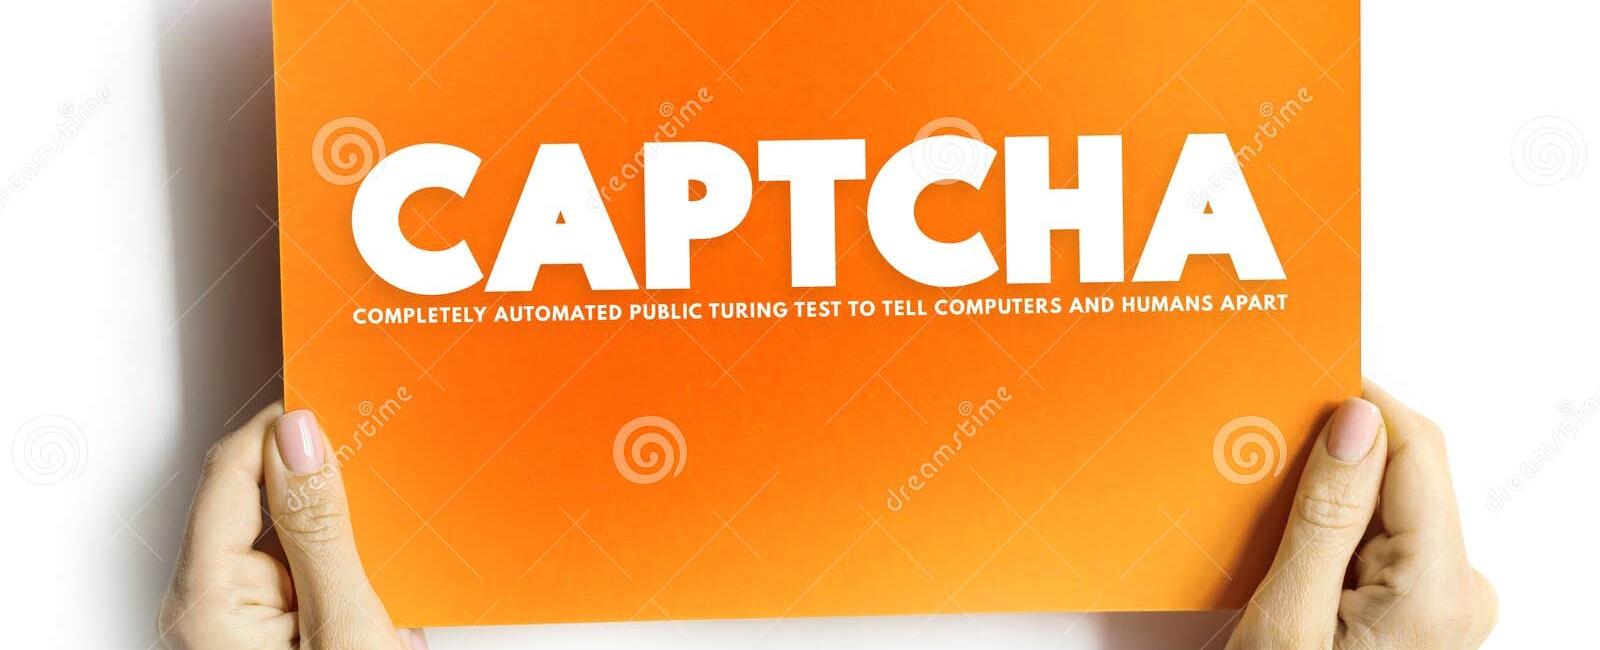 Captcha is an acronym for completely automated public turing test to tell computers and humans apart